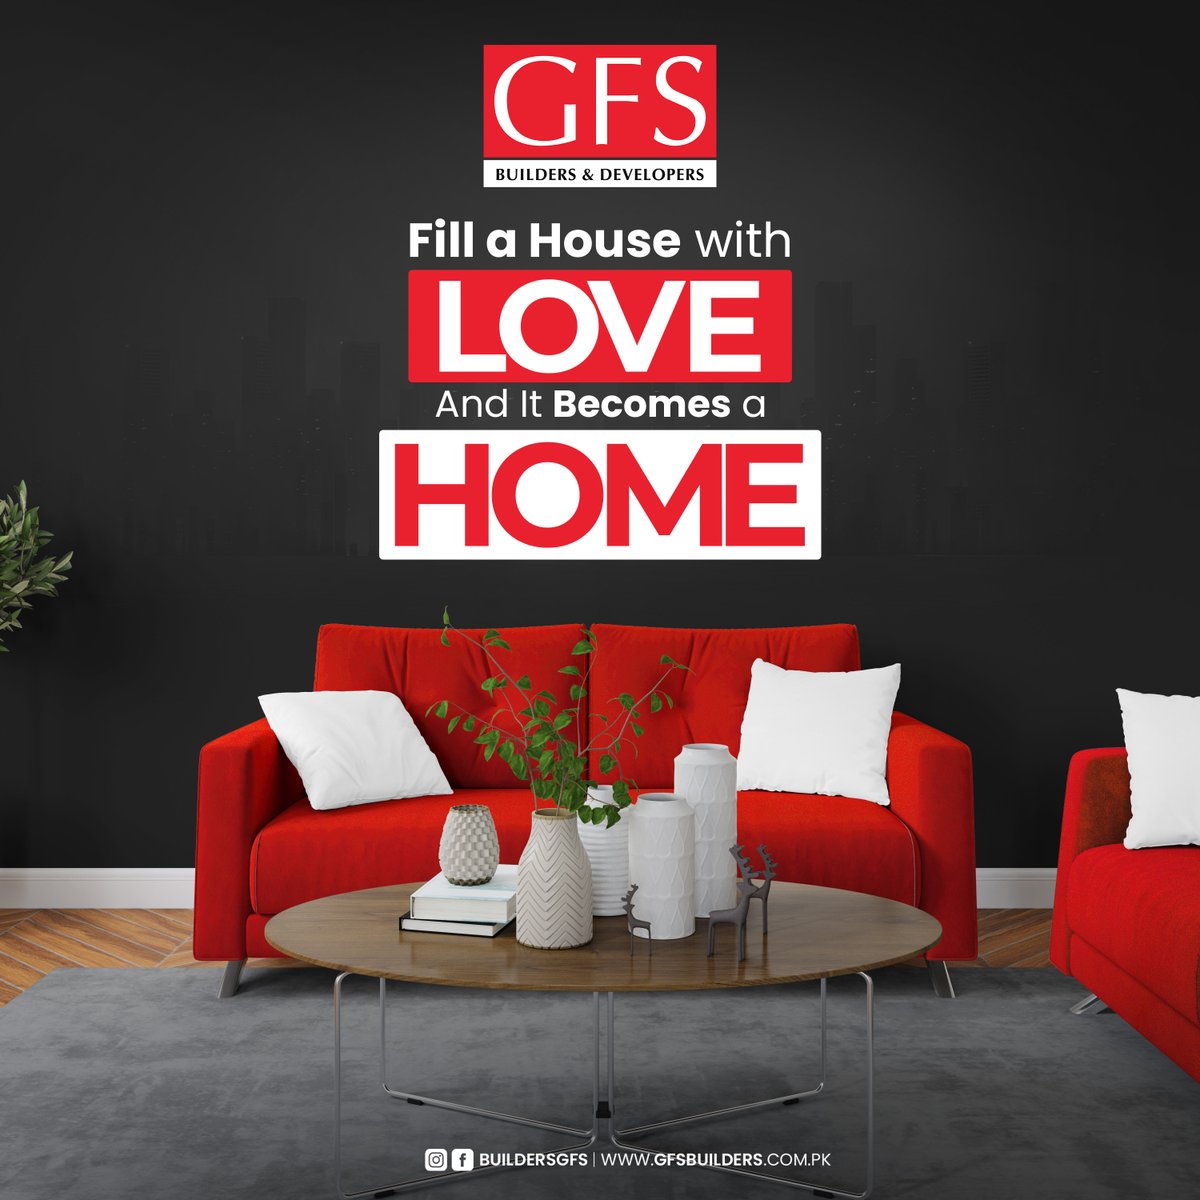 The walls can only make a house but the warmth of affection and love makes it truly a home sweet home. All that comes from the people who dwell with each other in peace and harmony.

#GFS #realestate #property #home #motivation #quotes #ownahouse #realestateinvesting